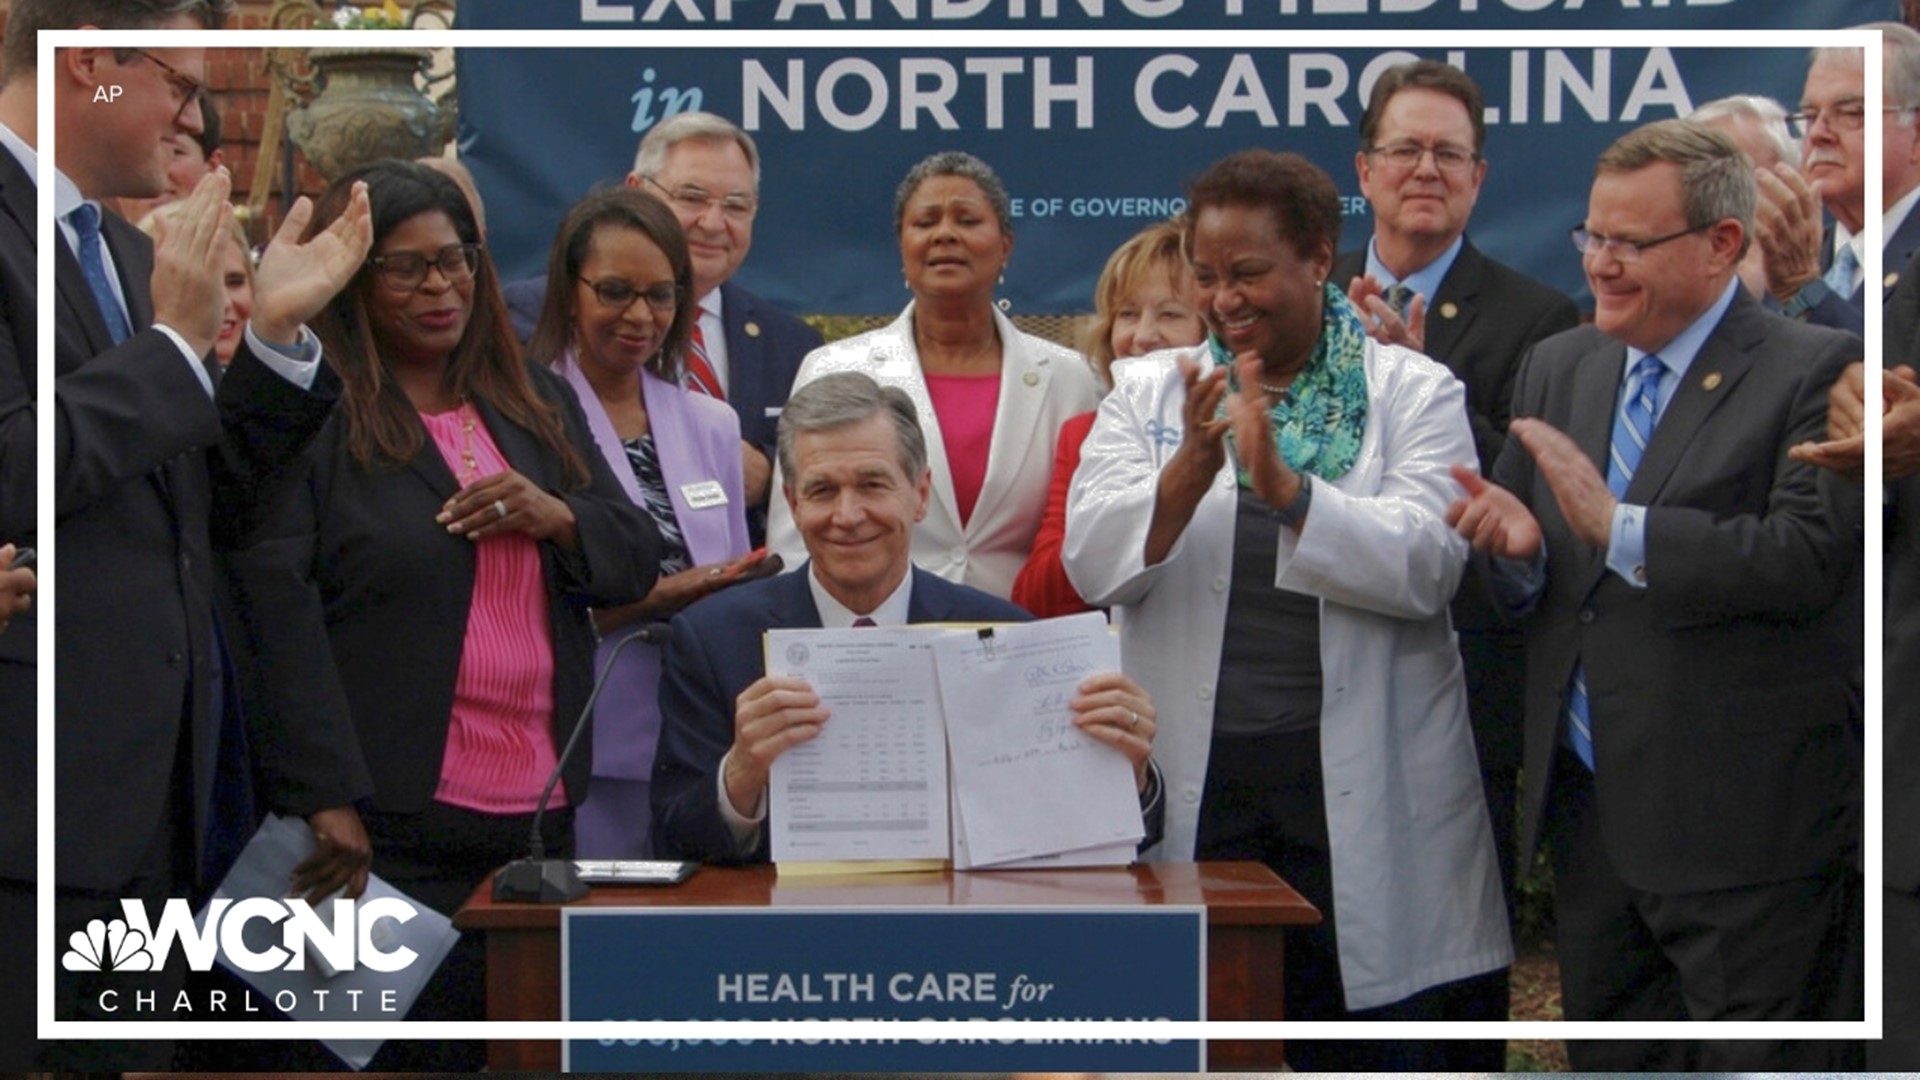 North Carolina Medicaid expansion enrollment reached 280,000 in the first weeks of the program.